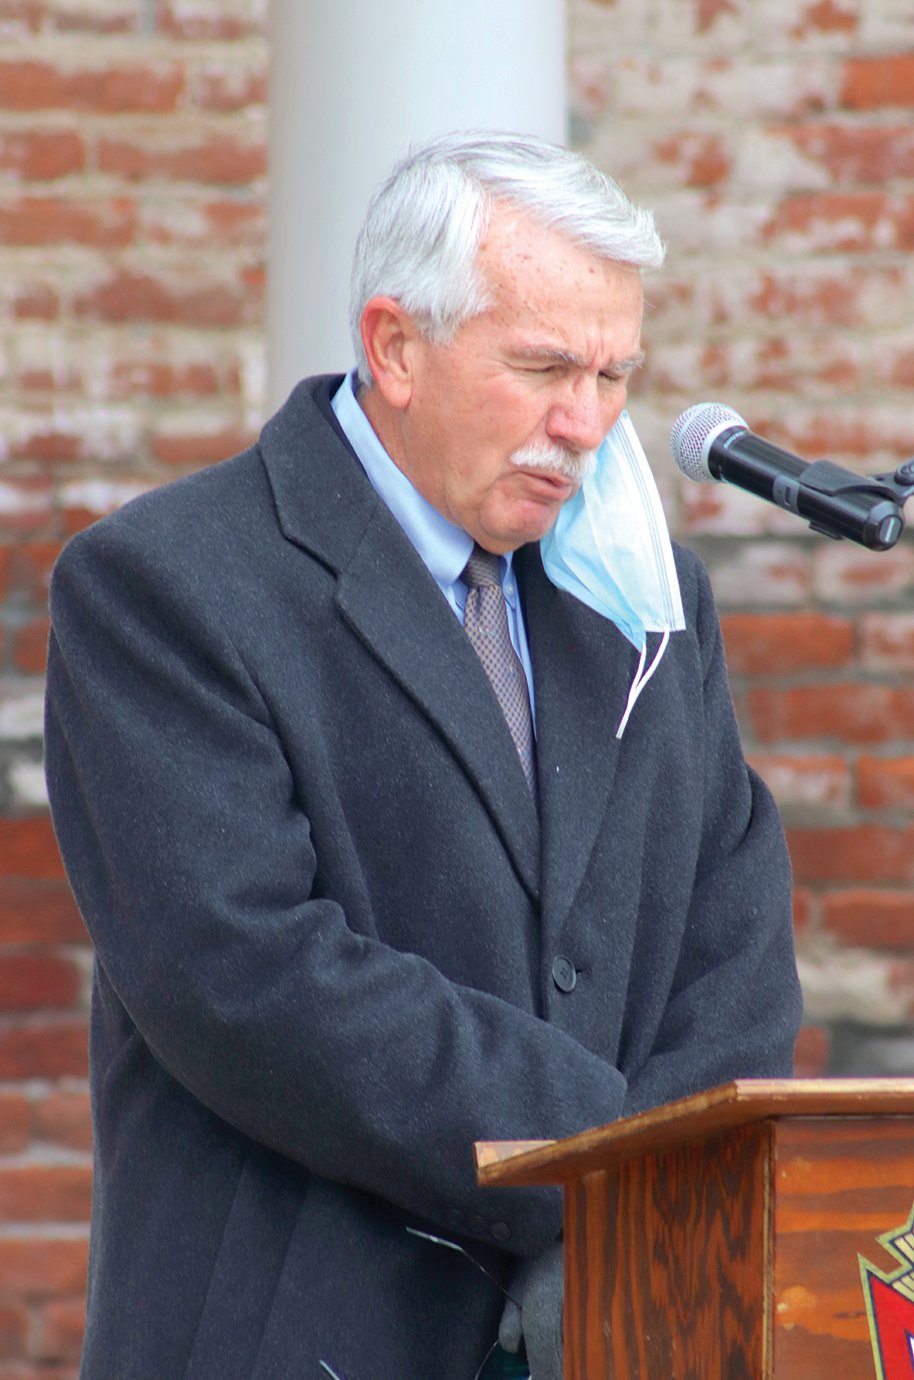 Reverend Mike Whitaker, former pastor of Whitesville Christian and New Hope Christian churches, delivers the opening prayer and later the benediction at Canine Plaza during services on Veterans Day.